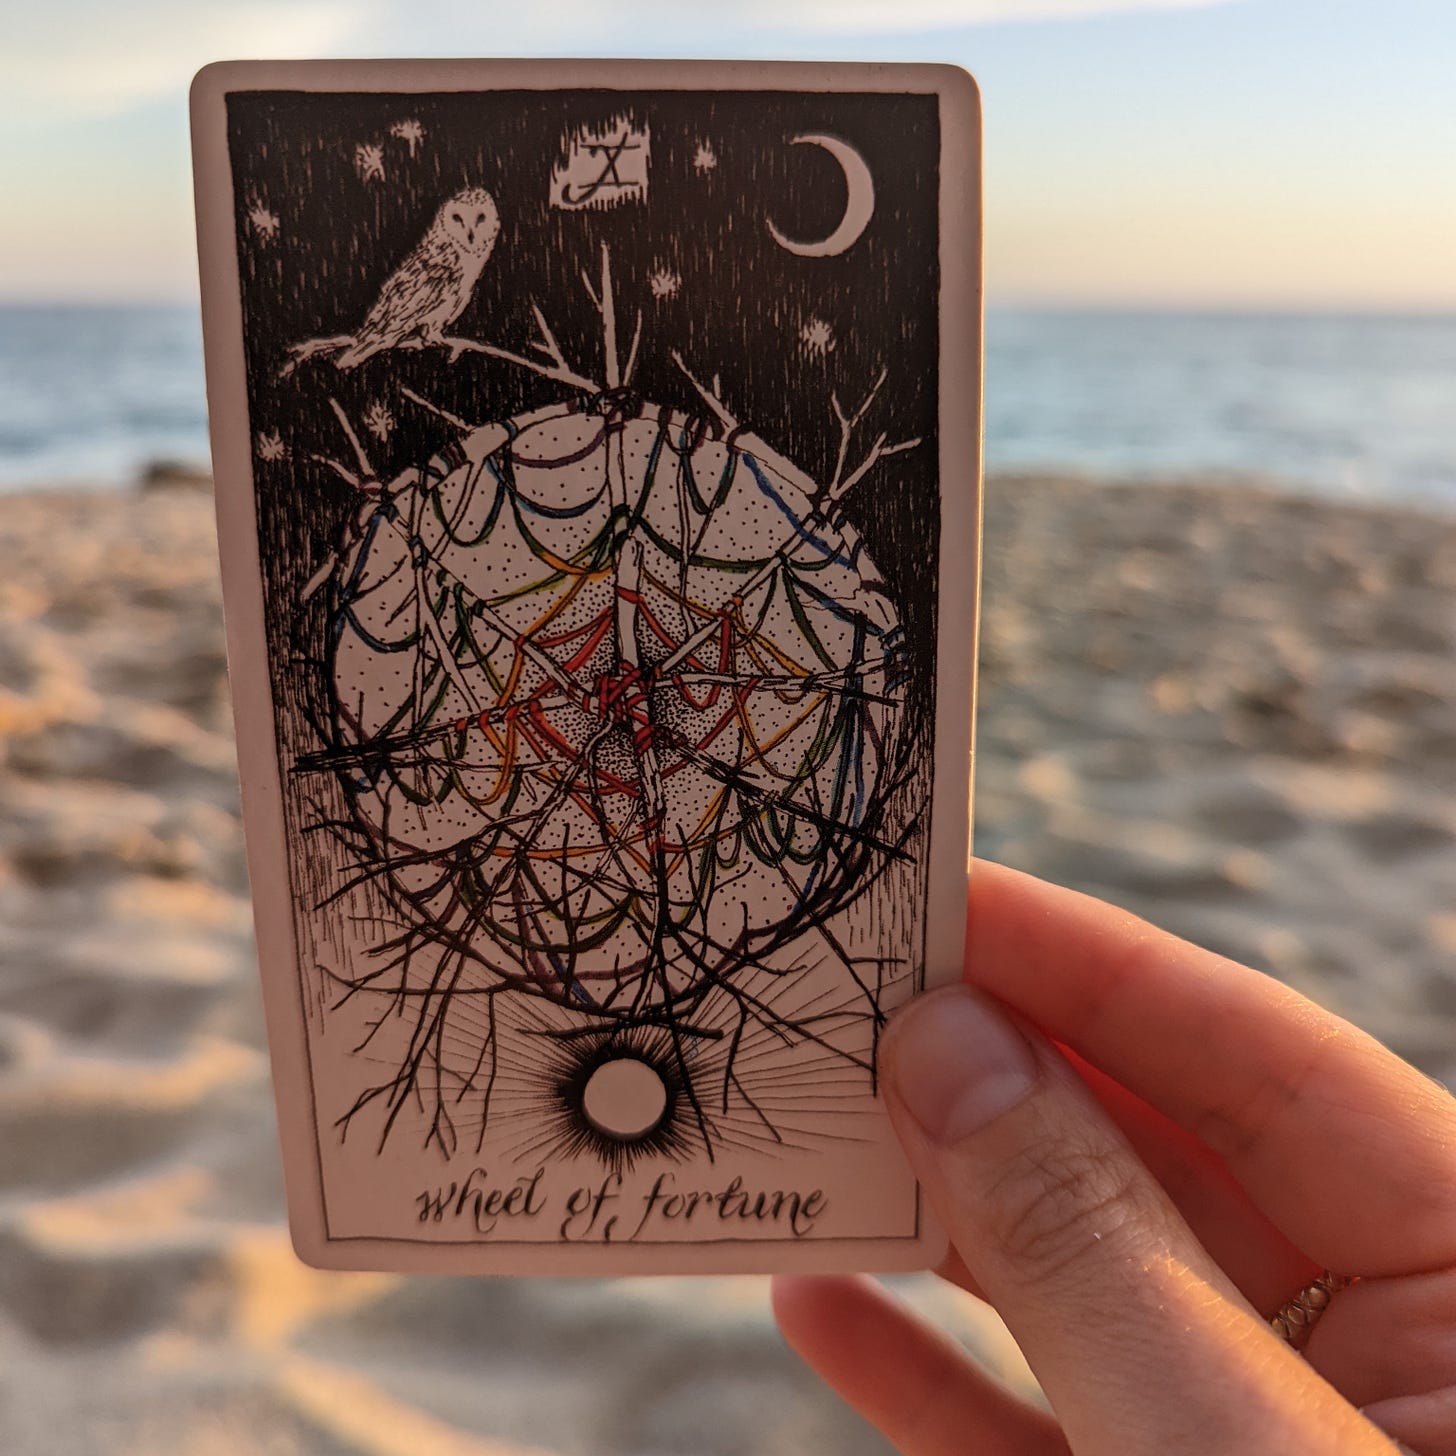 A hand holds up The Wheel of Fortune tarot card from The Wild Unknown Tarot deck on a beach at sunset. The card features a dreamcatcher made from rainbow thread and branches, with 4 branches crossed in the center to make a compass. An owl is perched at the top of the dreamcatcher, with a crescent moon on the right hand side of the card. The sun is at the bottom of the card.